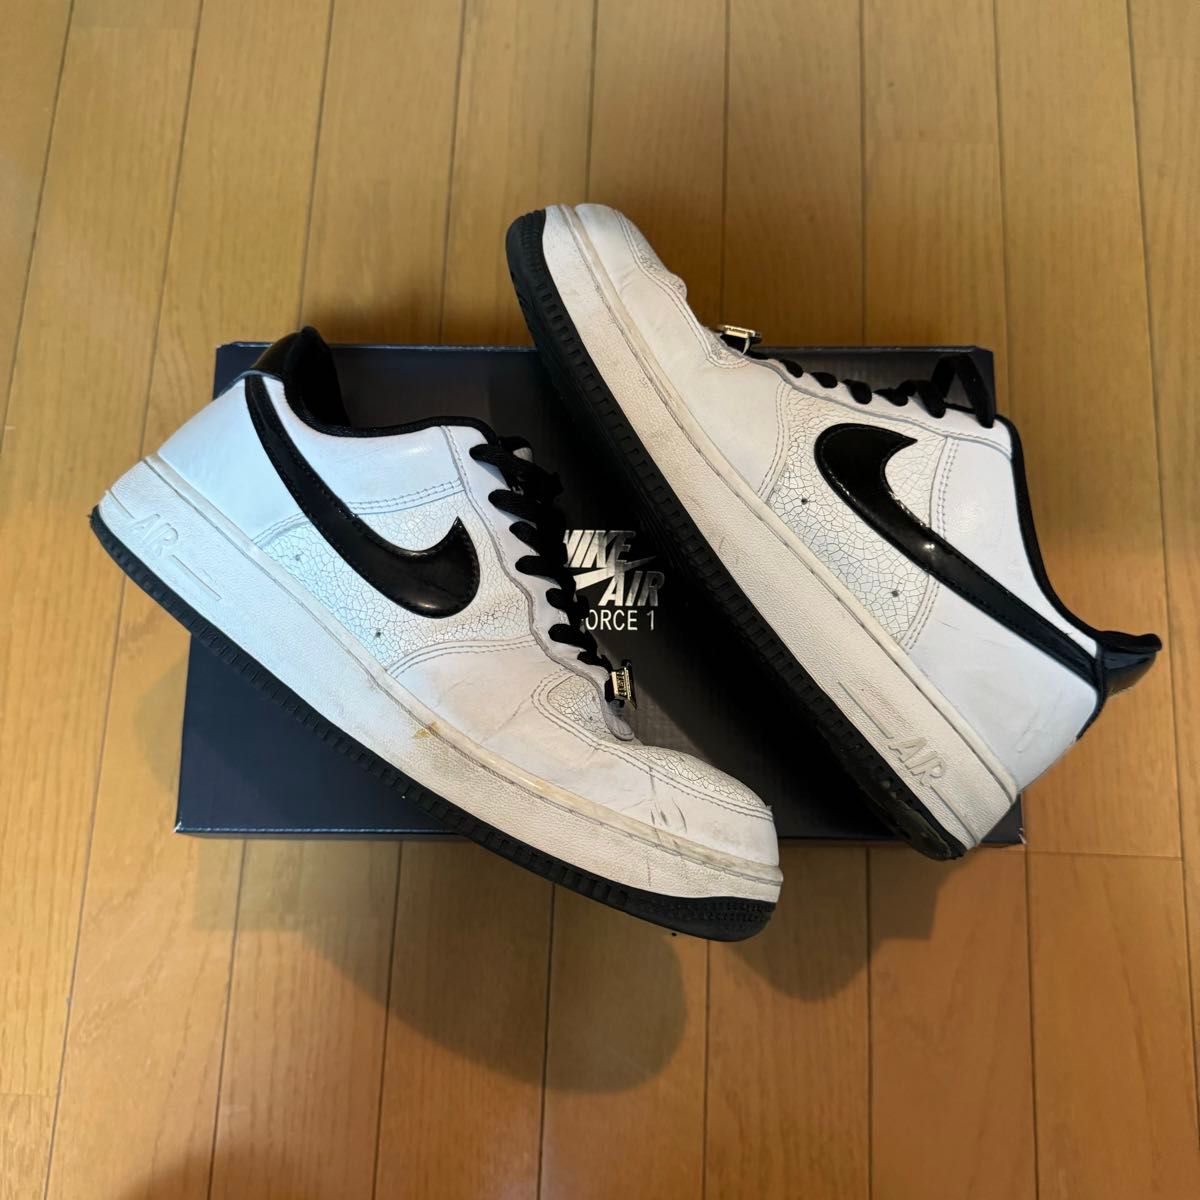 Nike Air Force 1 Low '07 LV8 "World Champ/White and Black"